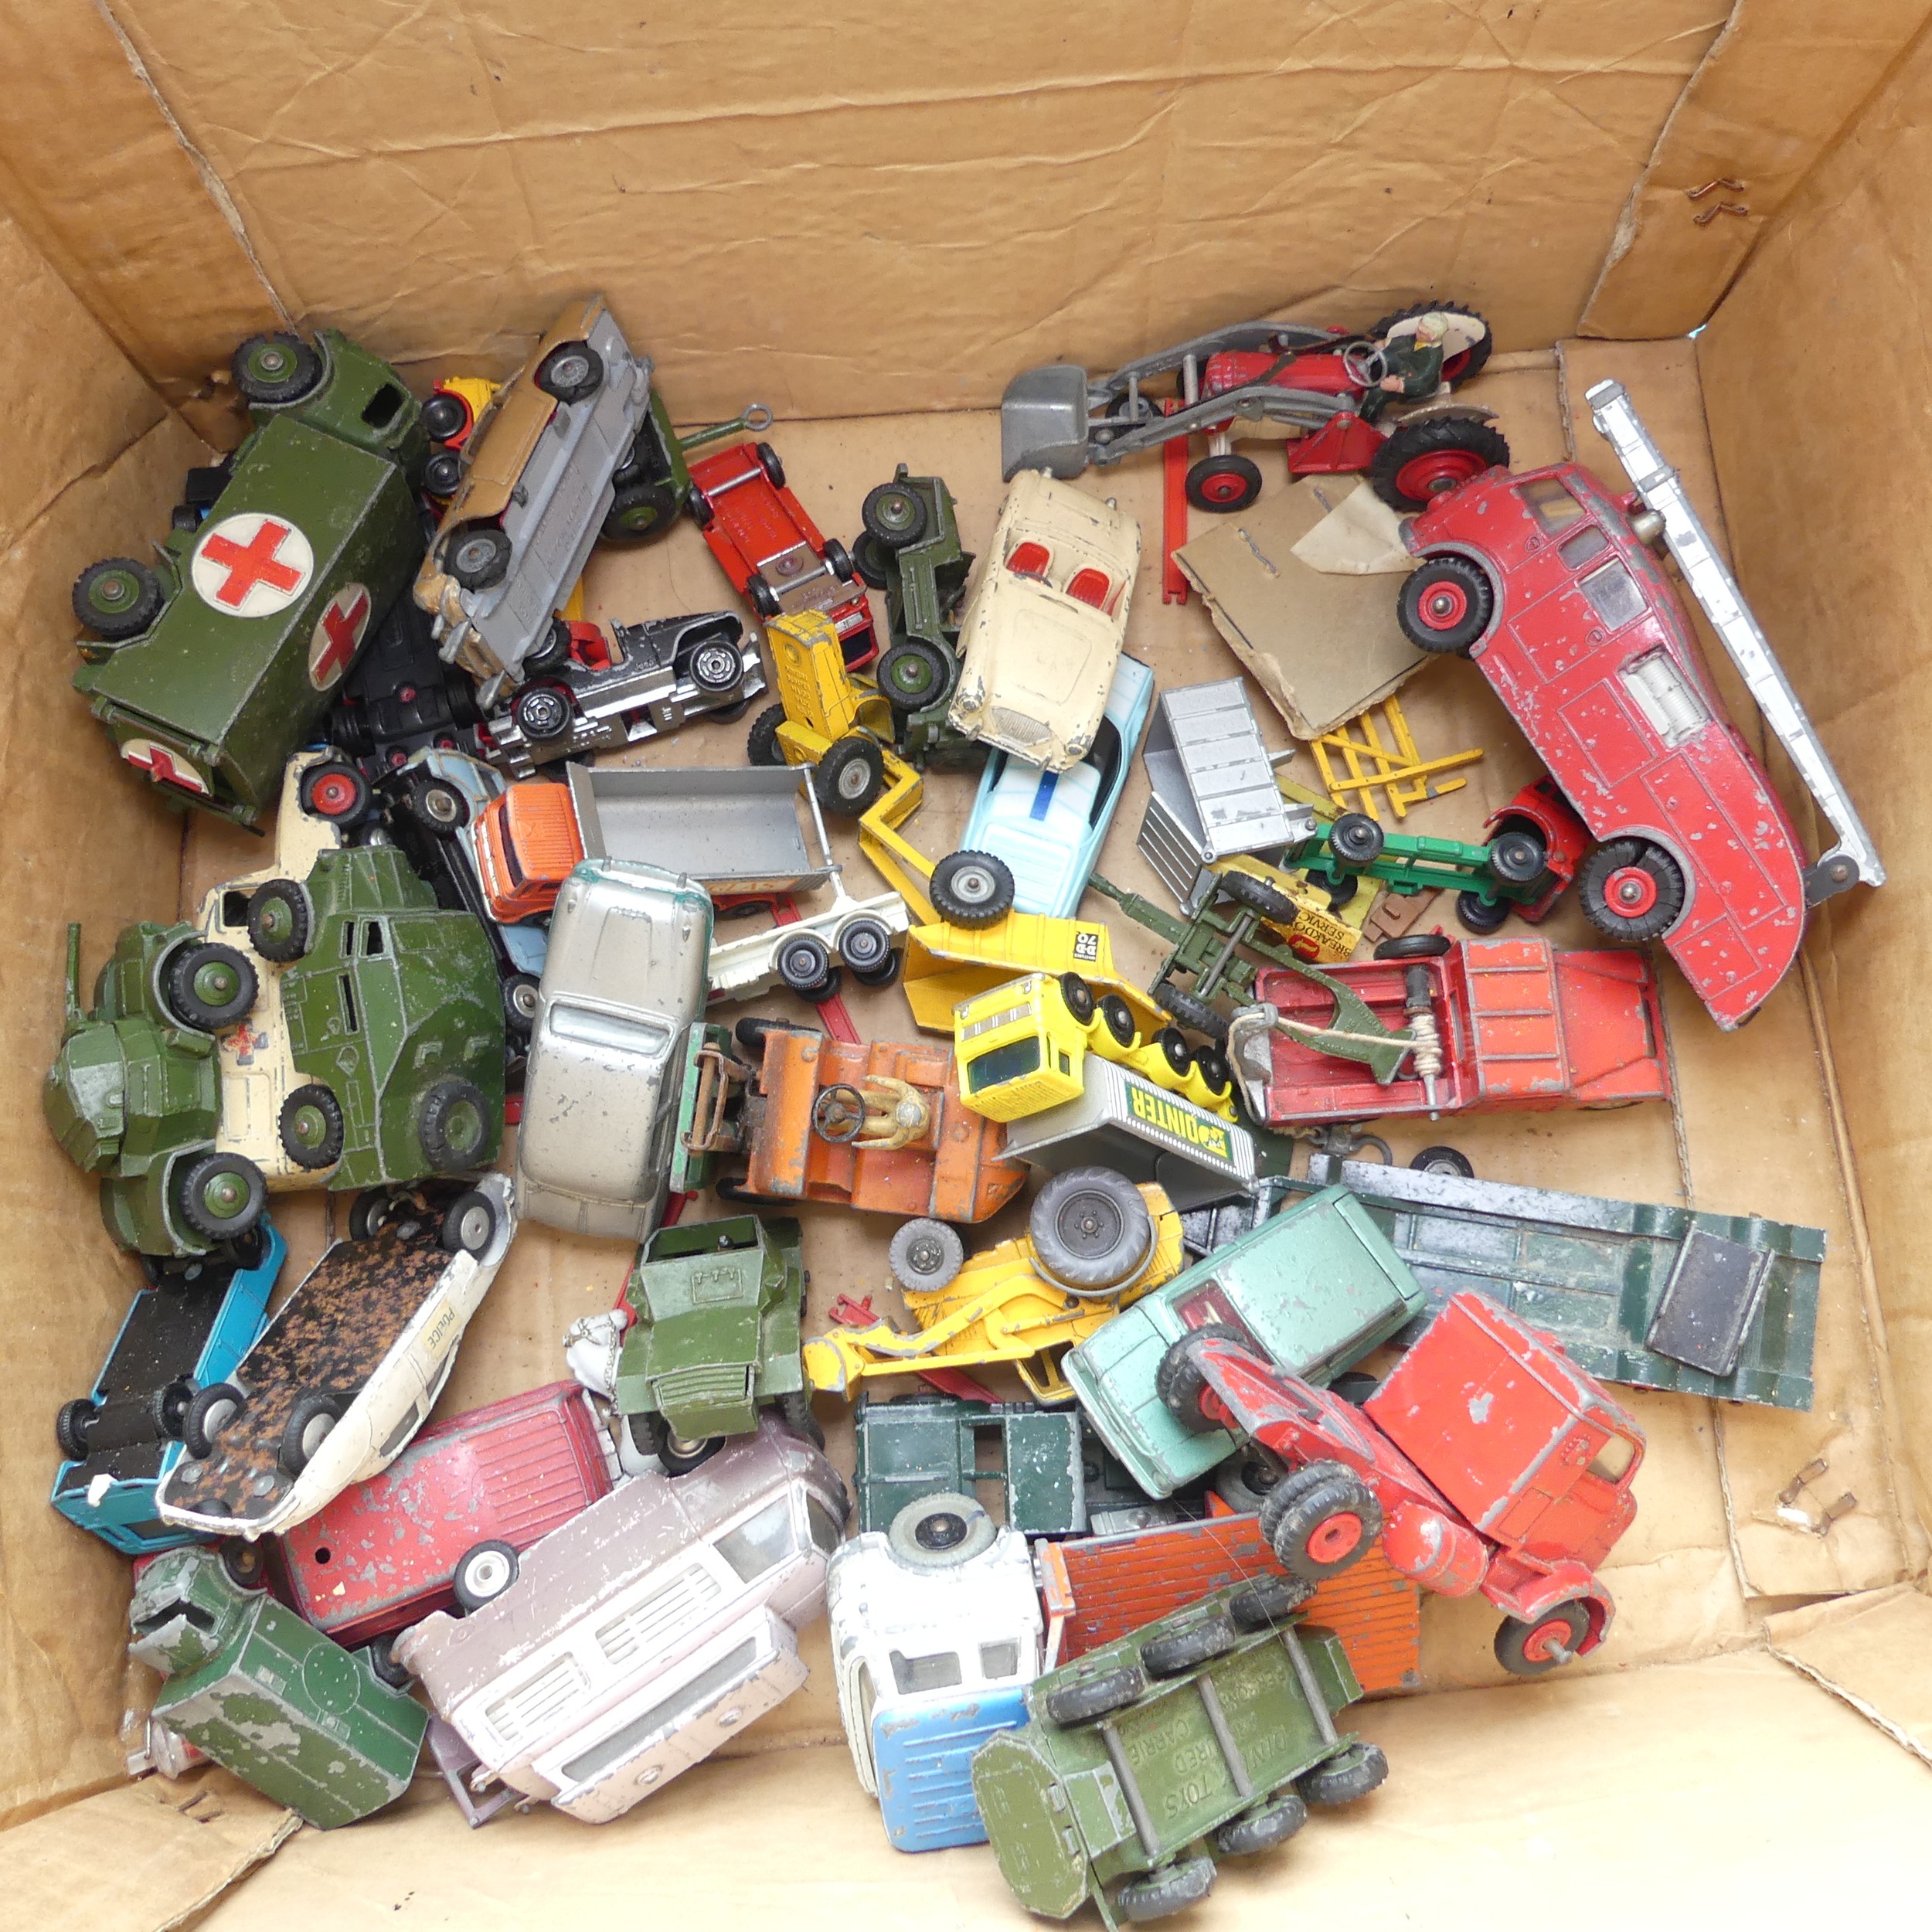 A collection of play-worn die-cast metal toy model cars, commercial and army vehicles, mostly - Bild 2 aus 3